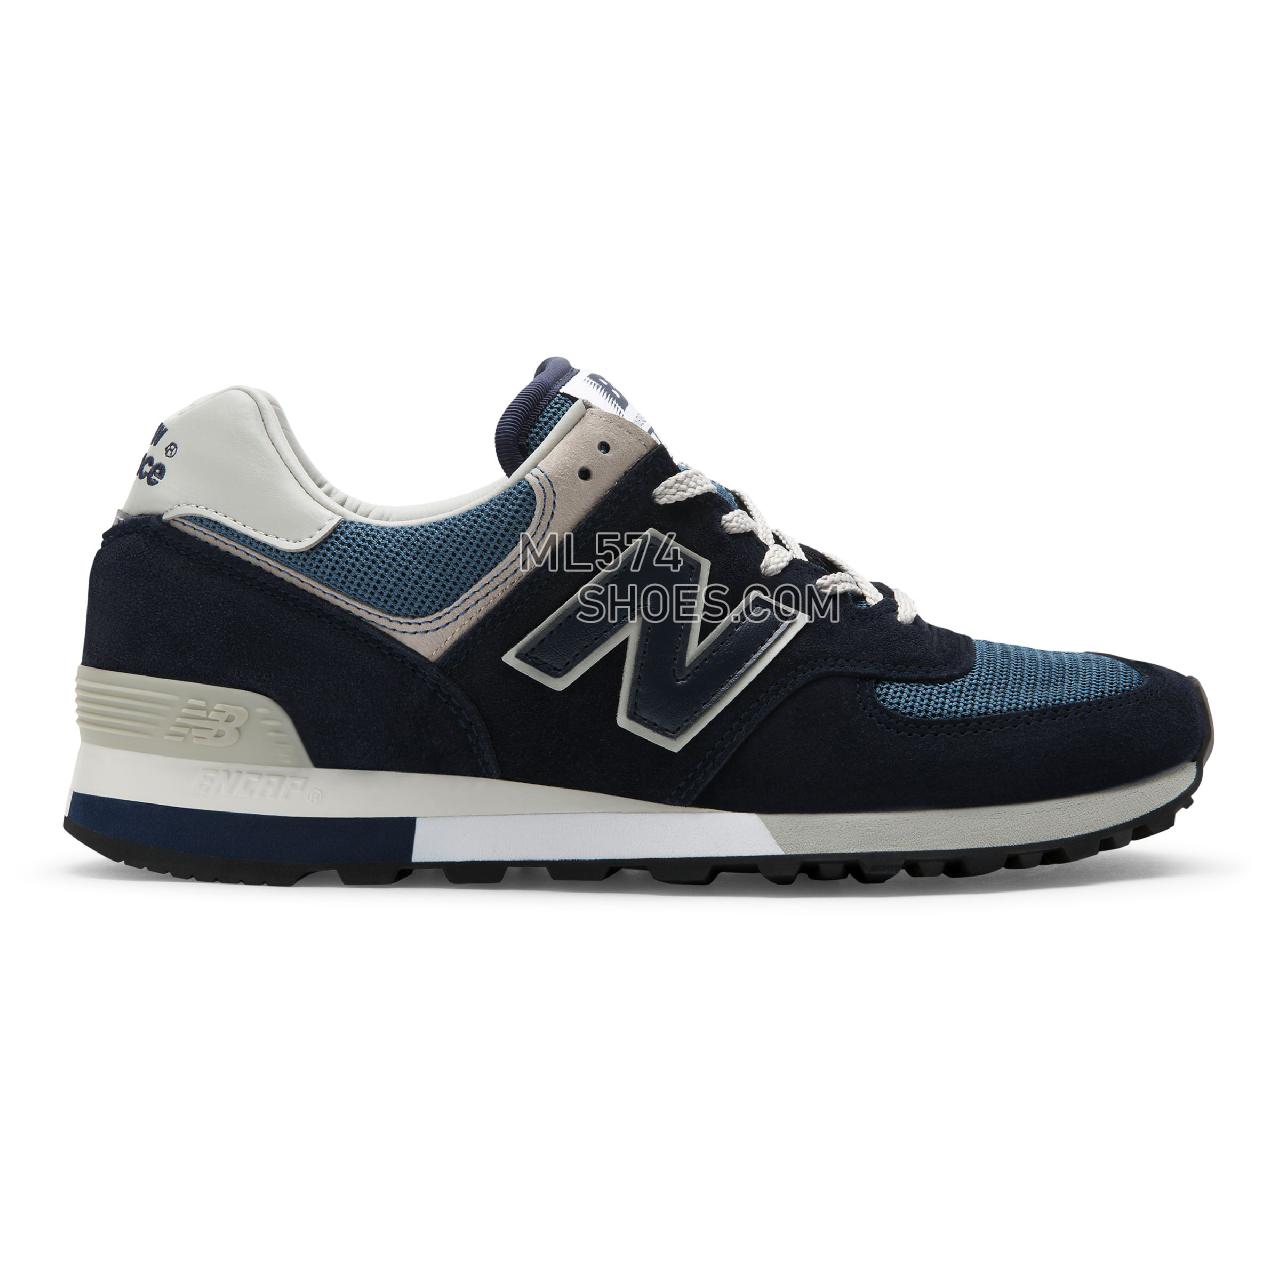 New Balance 576 Made in UK - Men's 576 - Classic Navy with Grey - OM576OGN